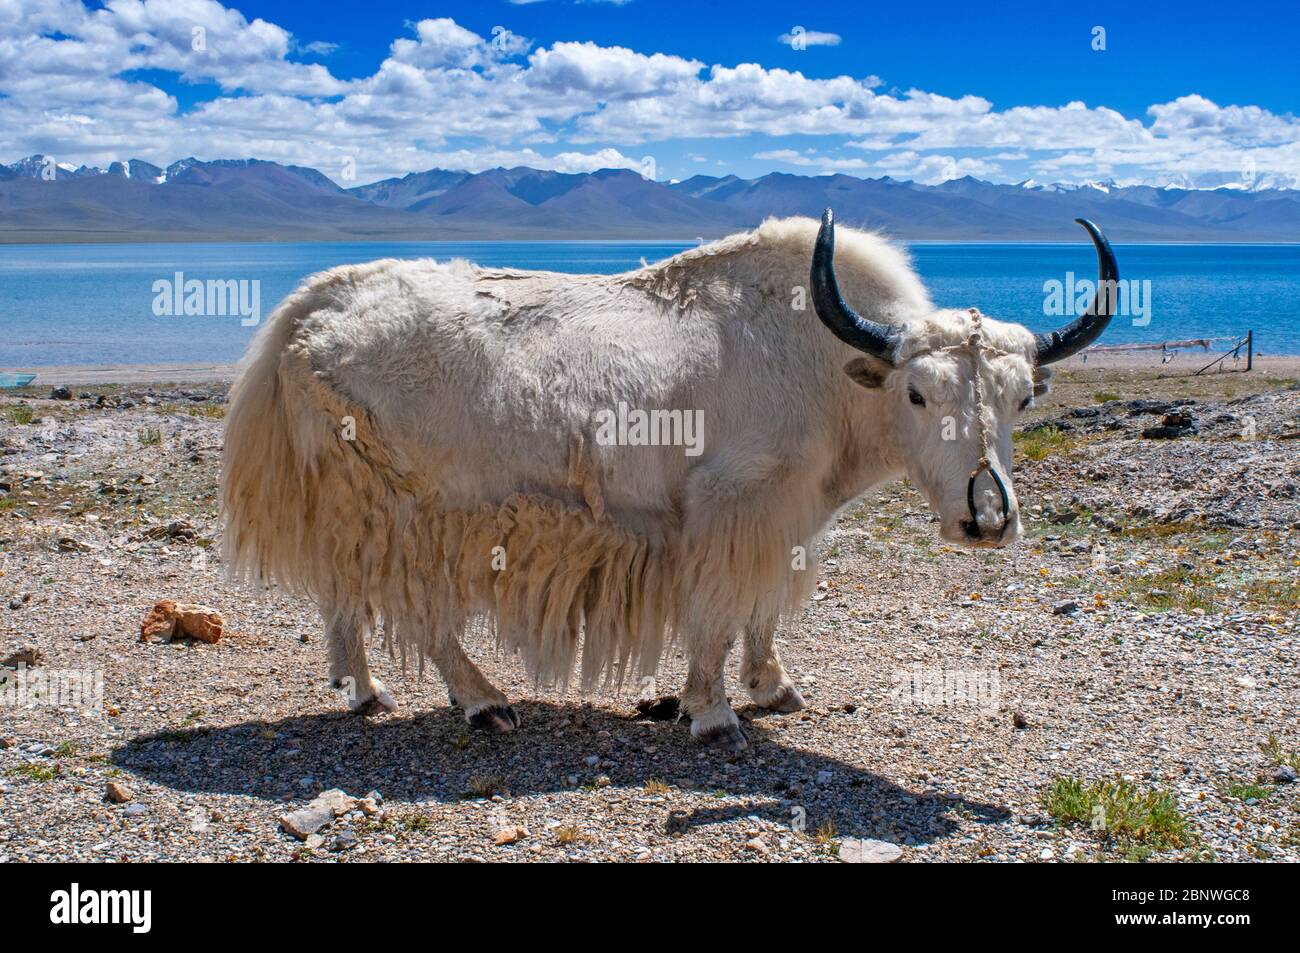 White yak in Namtso lake or Nam tso lake in Tibet China. Nam Tso Lake is the second largest lake in Tibet, and one of the most famous places on the 'R Stock Photo